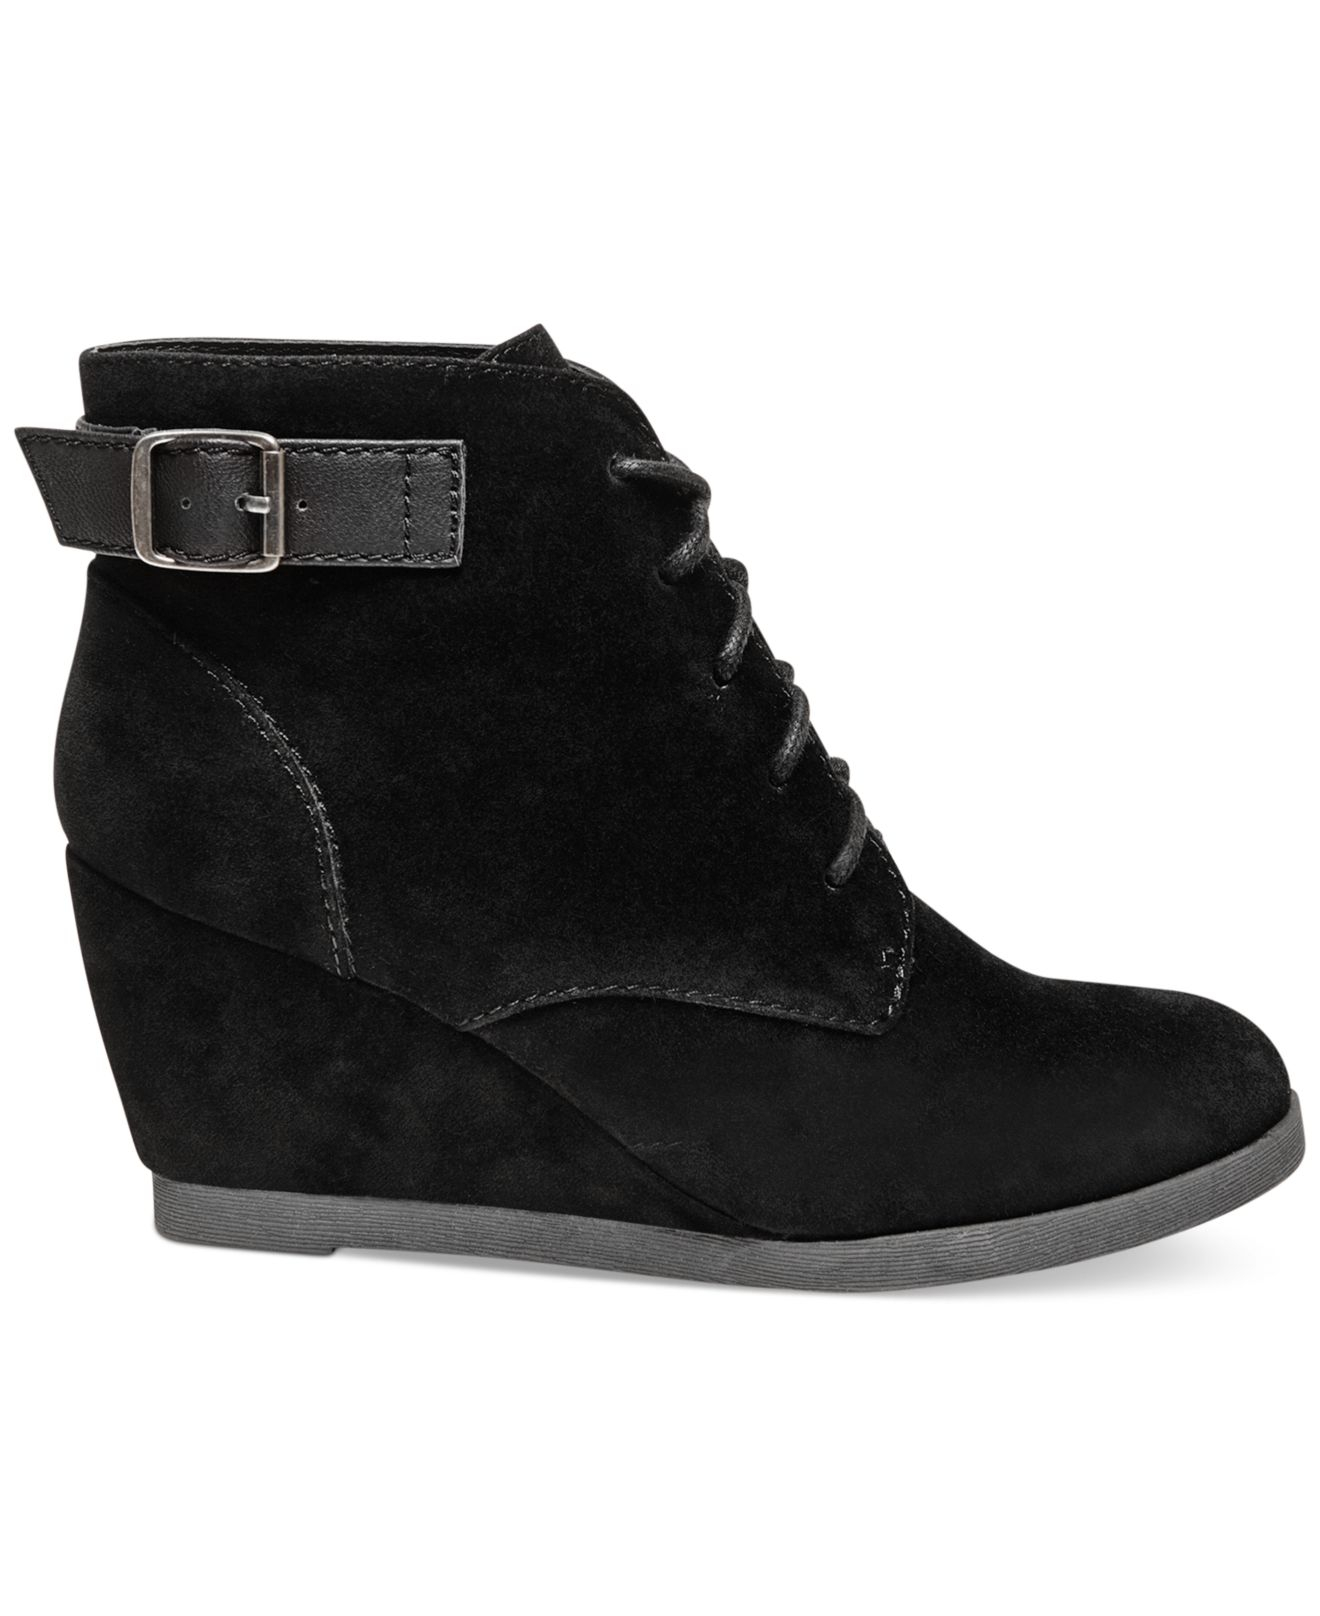 Lyst - Madden girl Dailey Lace Up Wedge Booties in Black